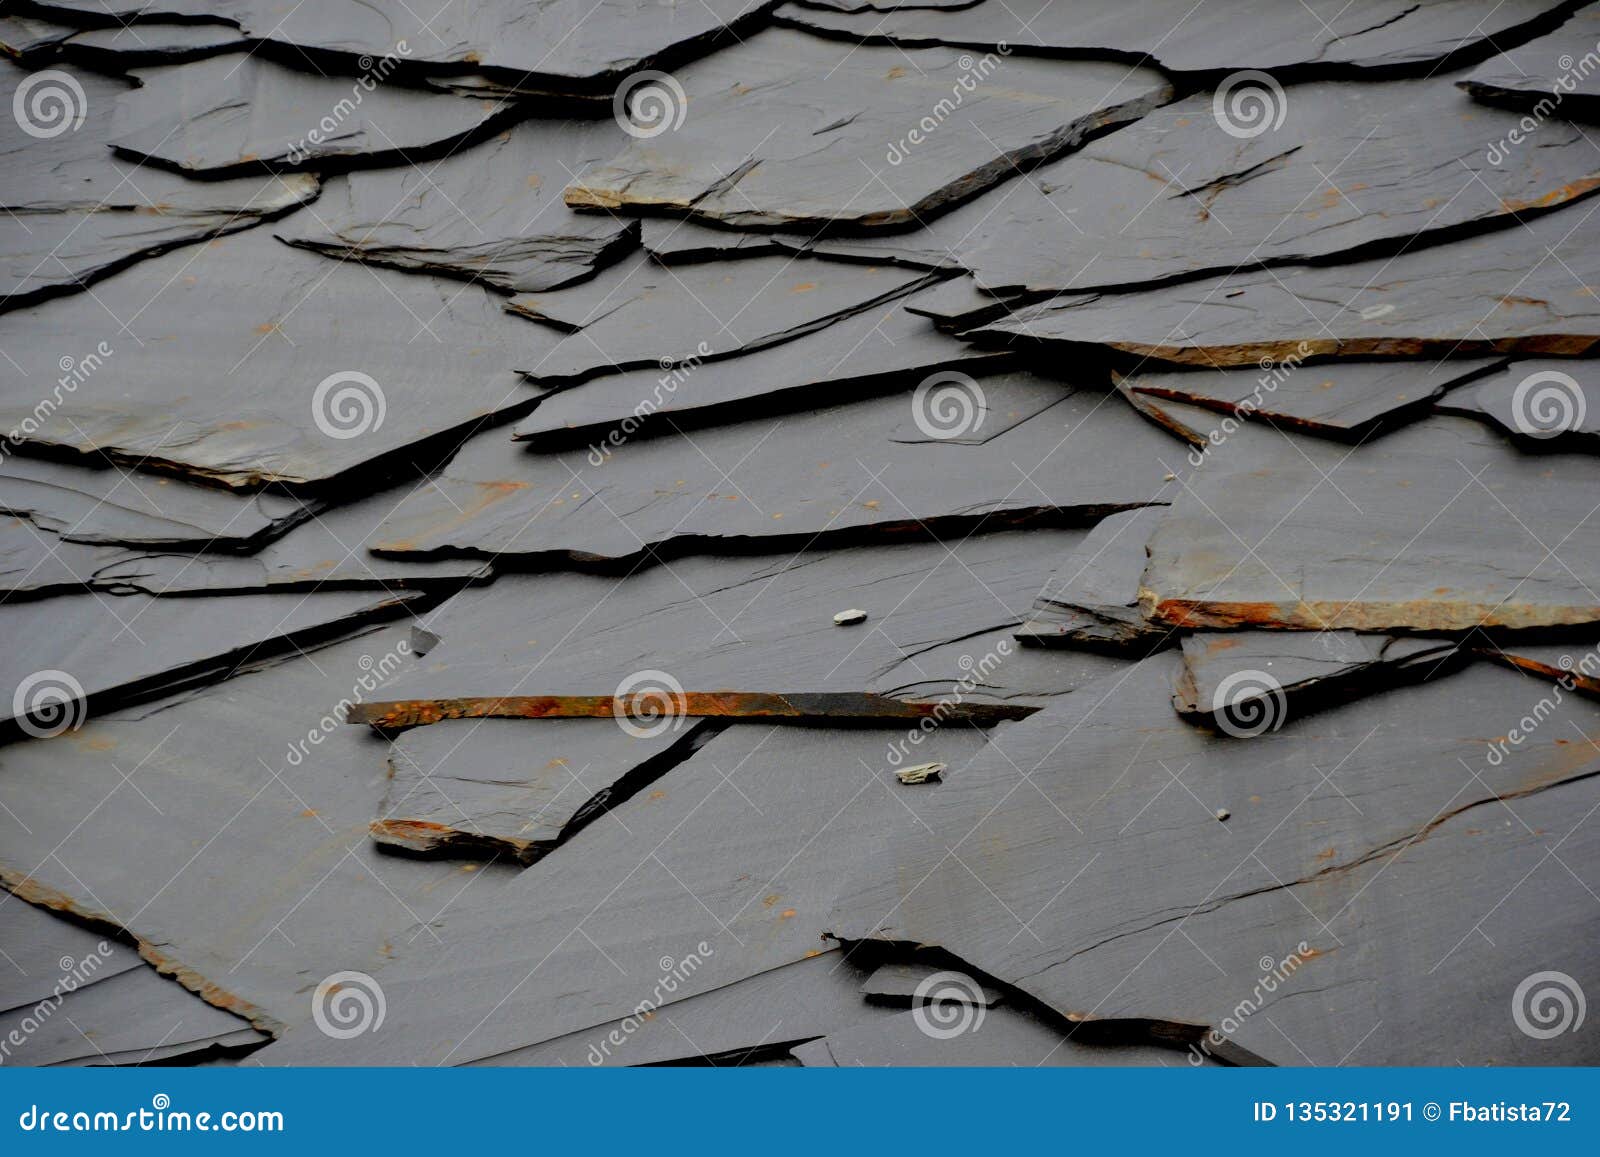 details of shale roof on a house built from schist in piodÃÂ¯ÃÂ¿ÃÂ½o, one of portugal`s schist villages in the aldeias do xisto